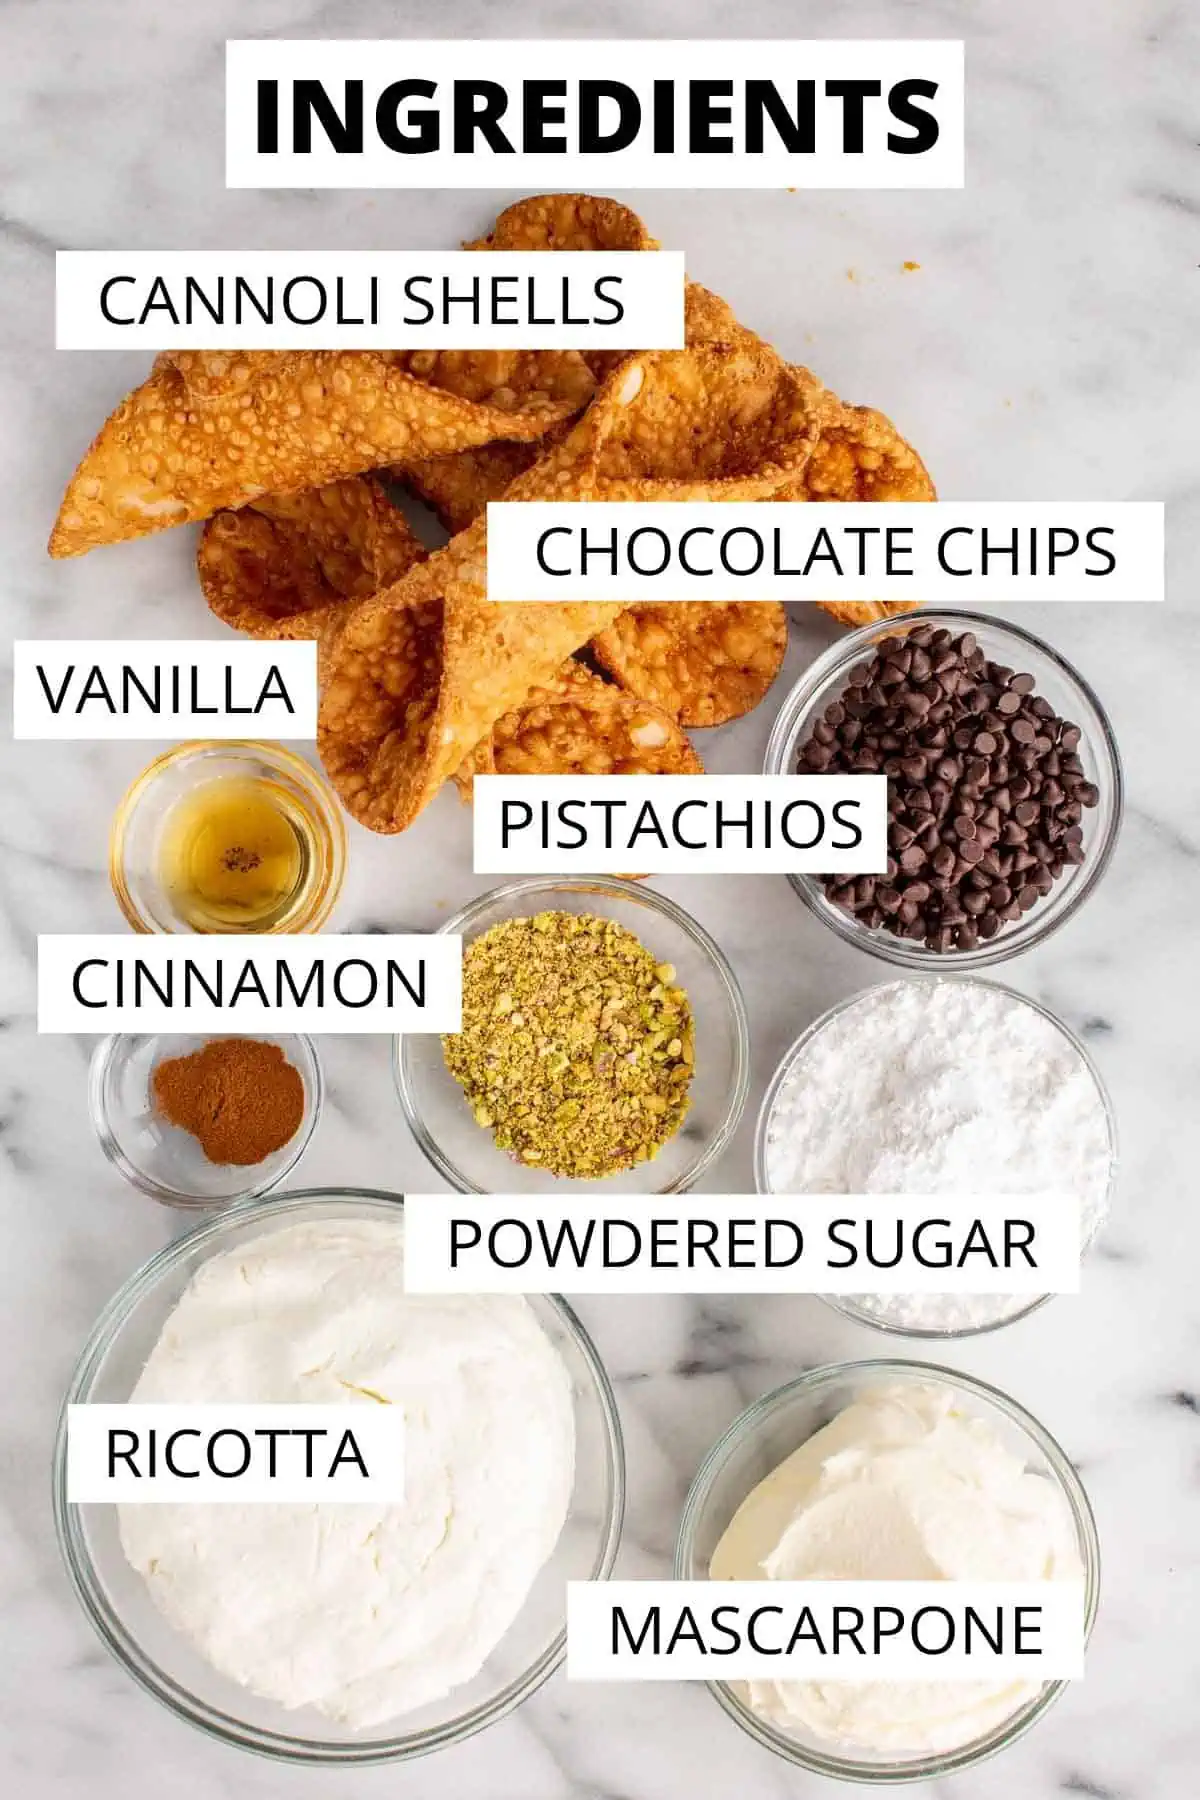 Ingredients needed to make cannoli.